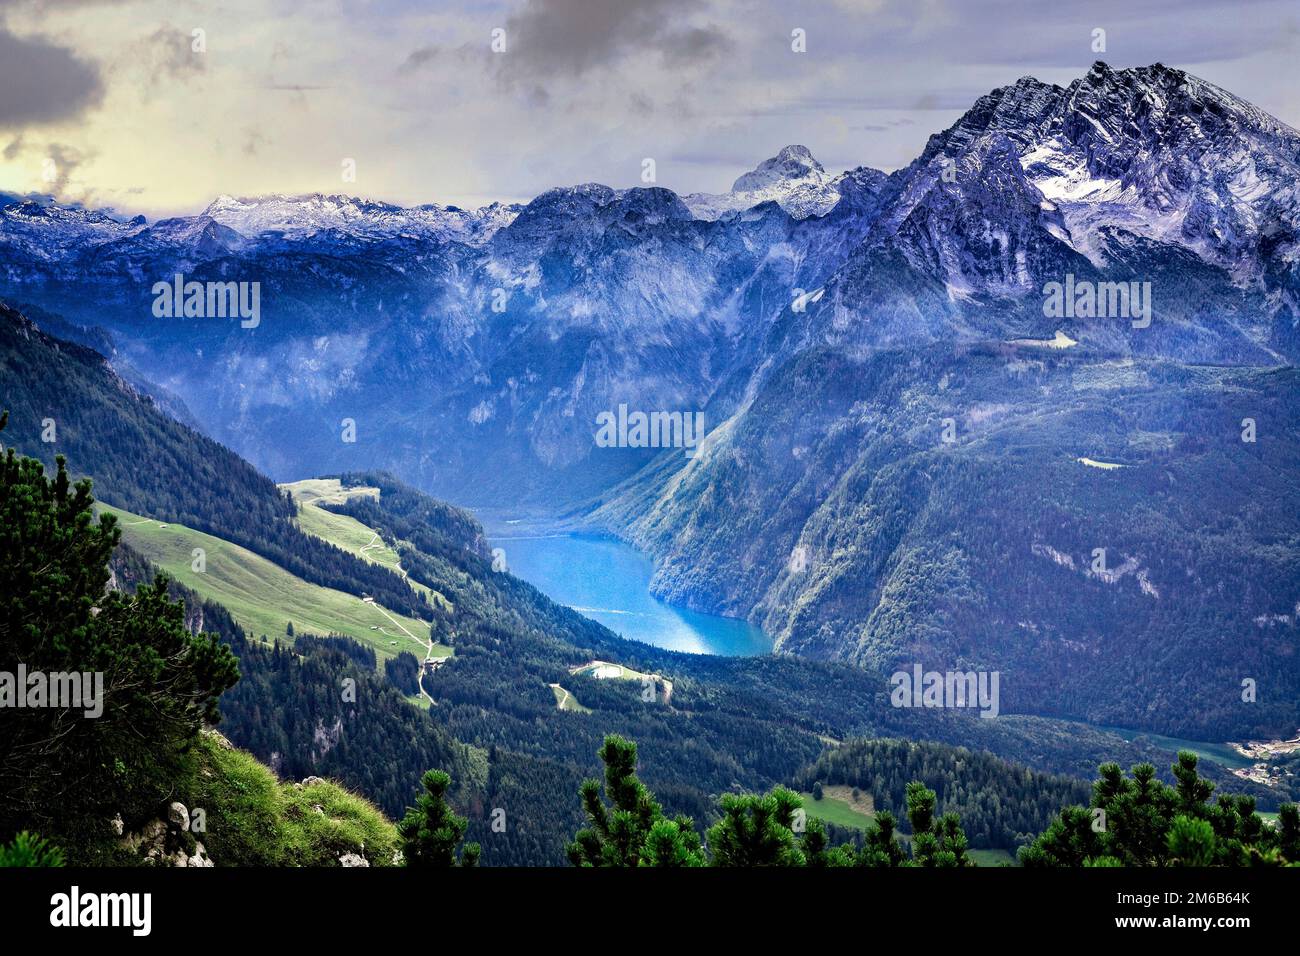 Konigsee is surrounded by the Bavarian Alps in Berchtesgaden, Germany. Stock Photo